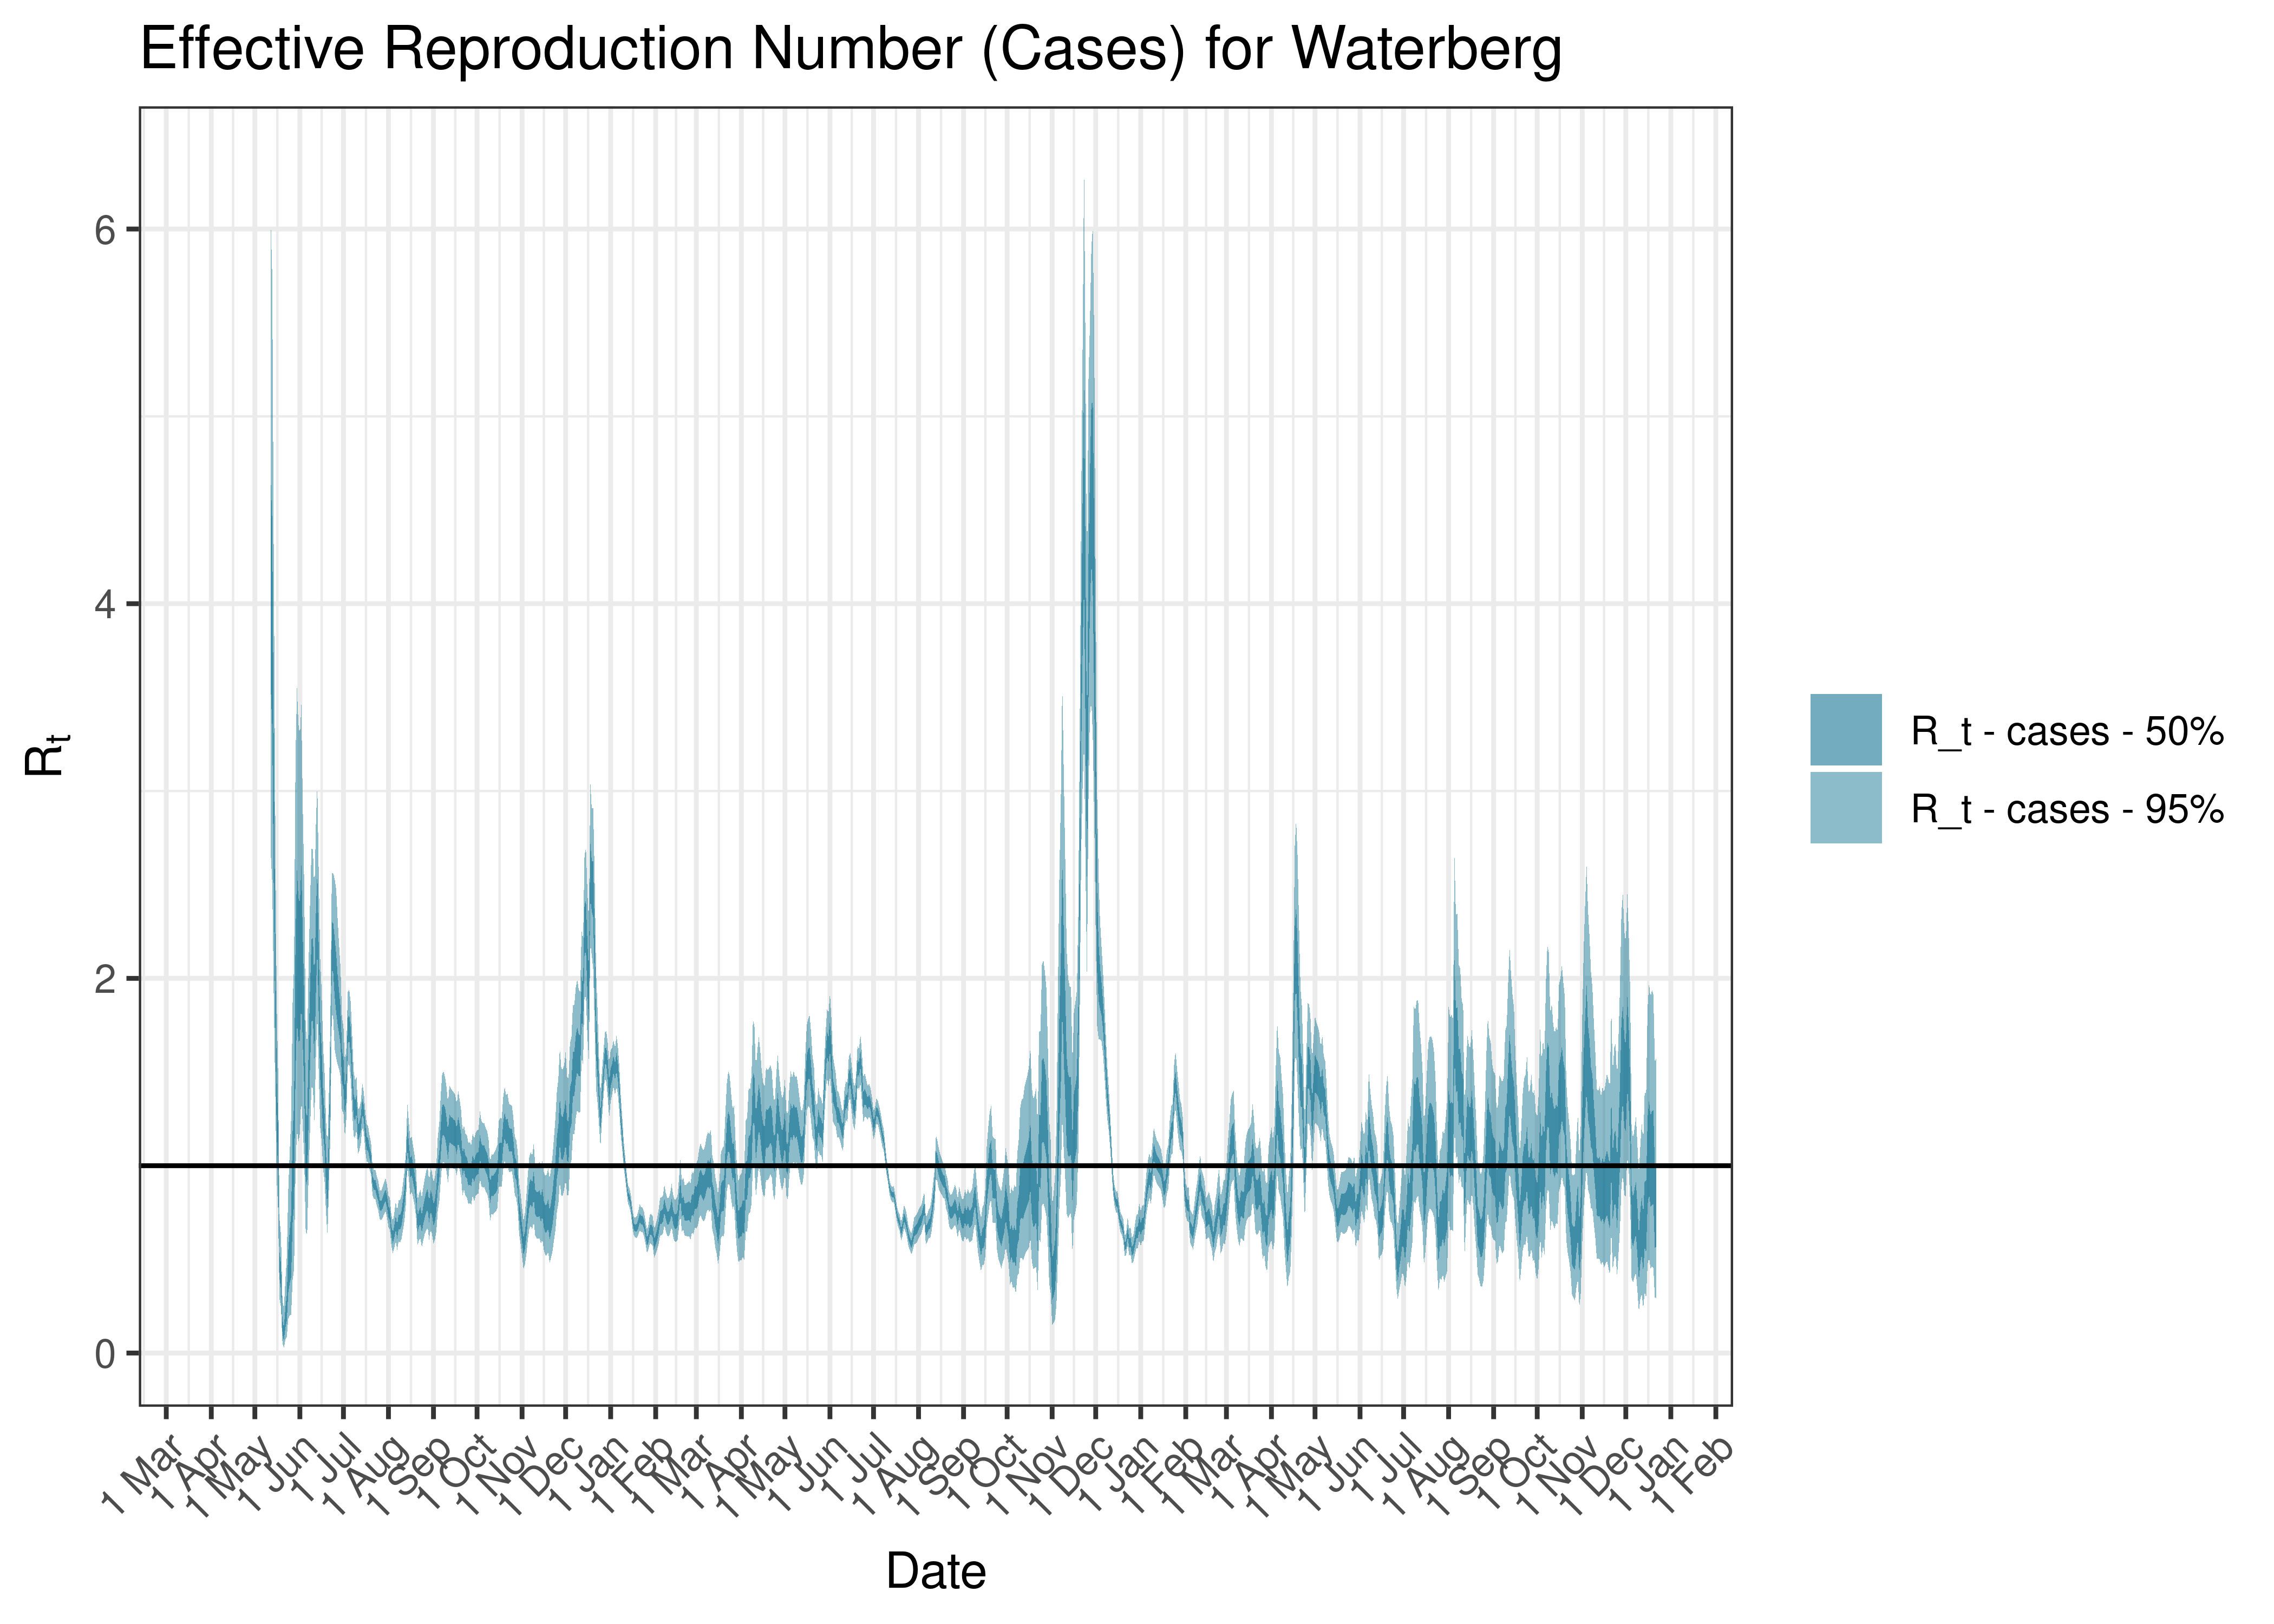 Estimated Effective Reproduction Number Based on Cases for Waterberg since 1 April 2020